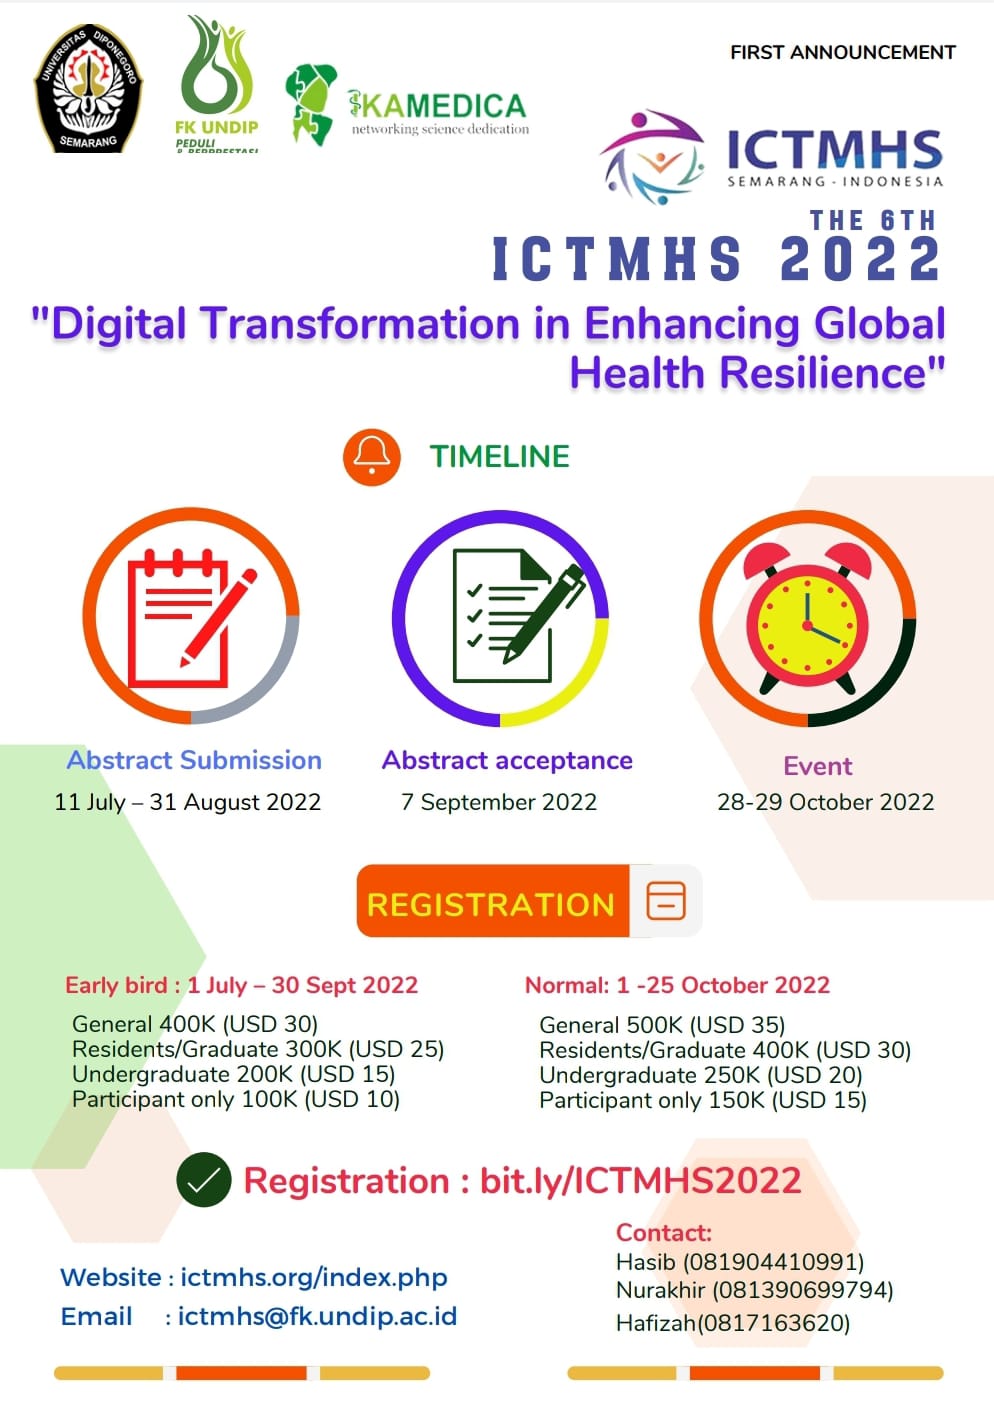 The 6th International Conference on Translational Medicine and Health Sciences (ICTMHS)